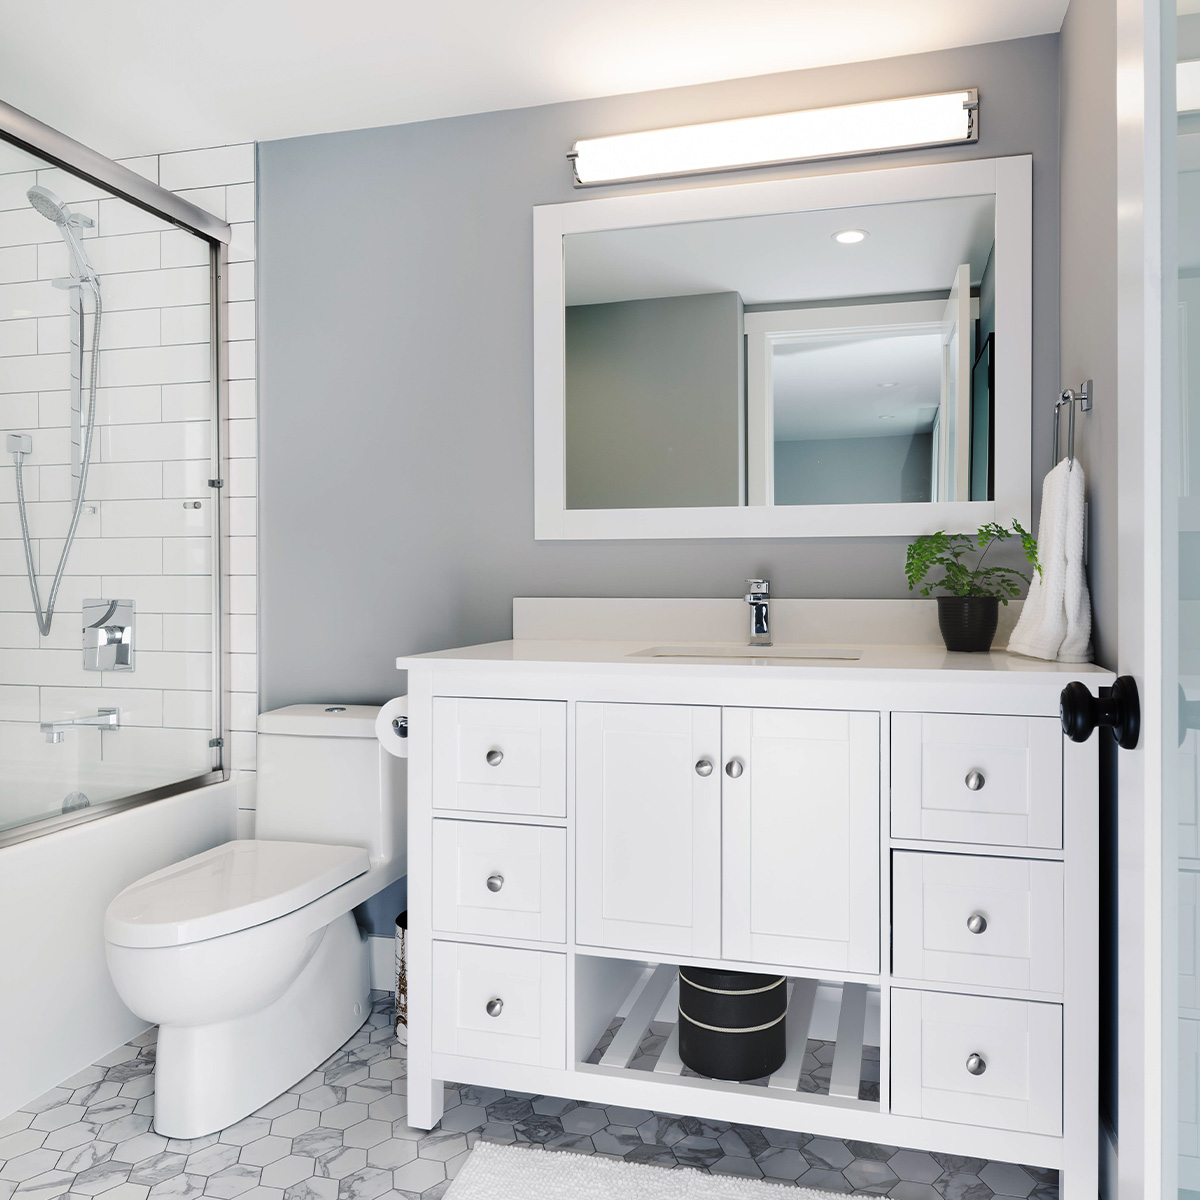 A clean bathroom with a white sink, toilet, and shower.